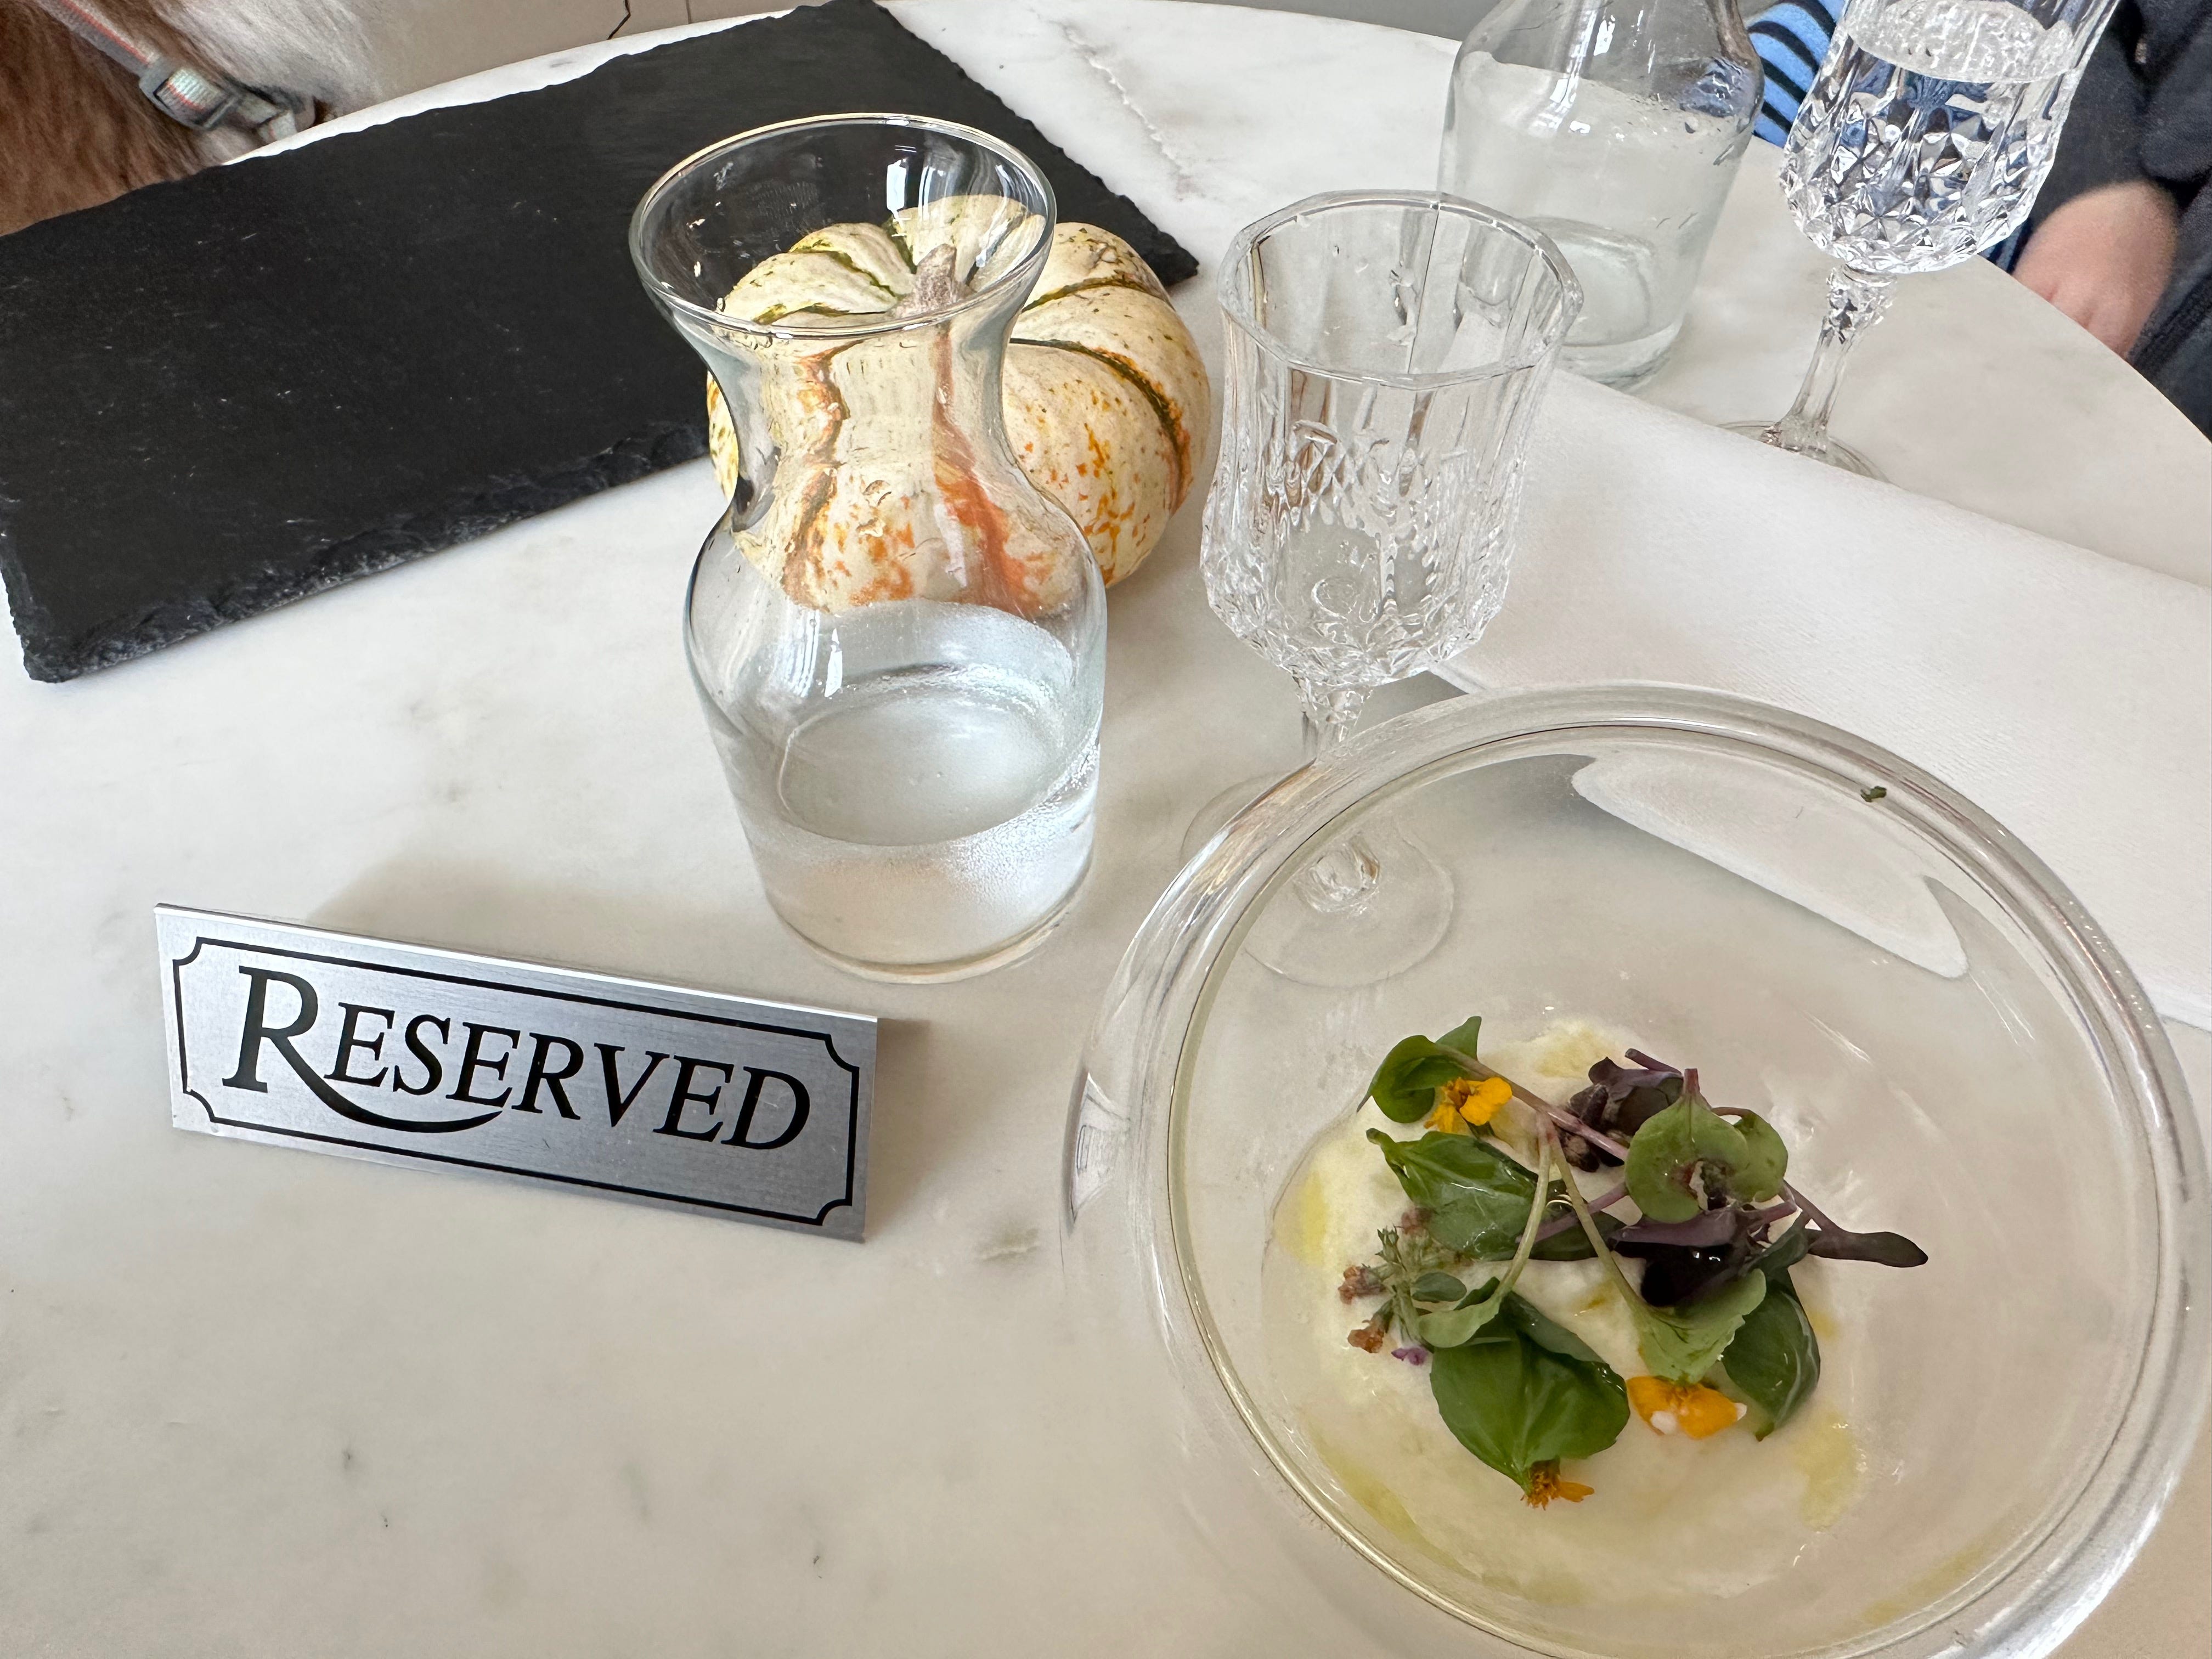 A small dish for humans to share was served in a glass bowl.